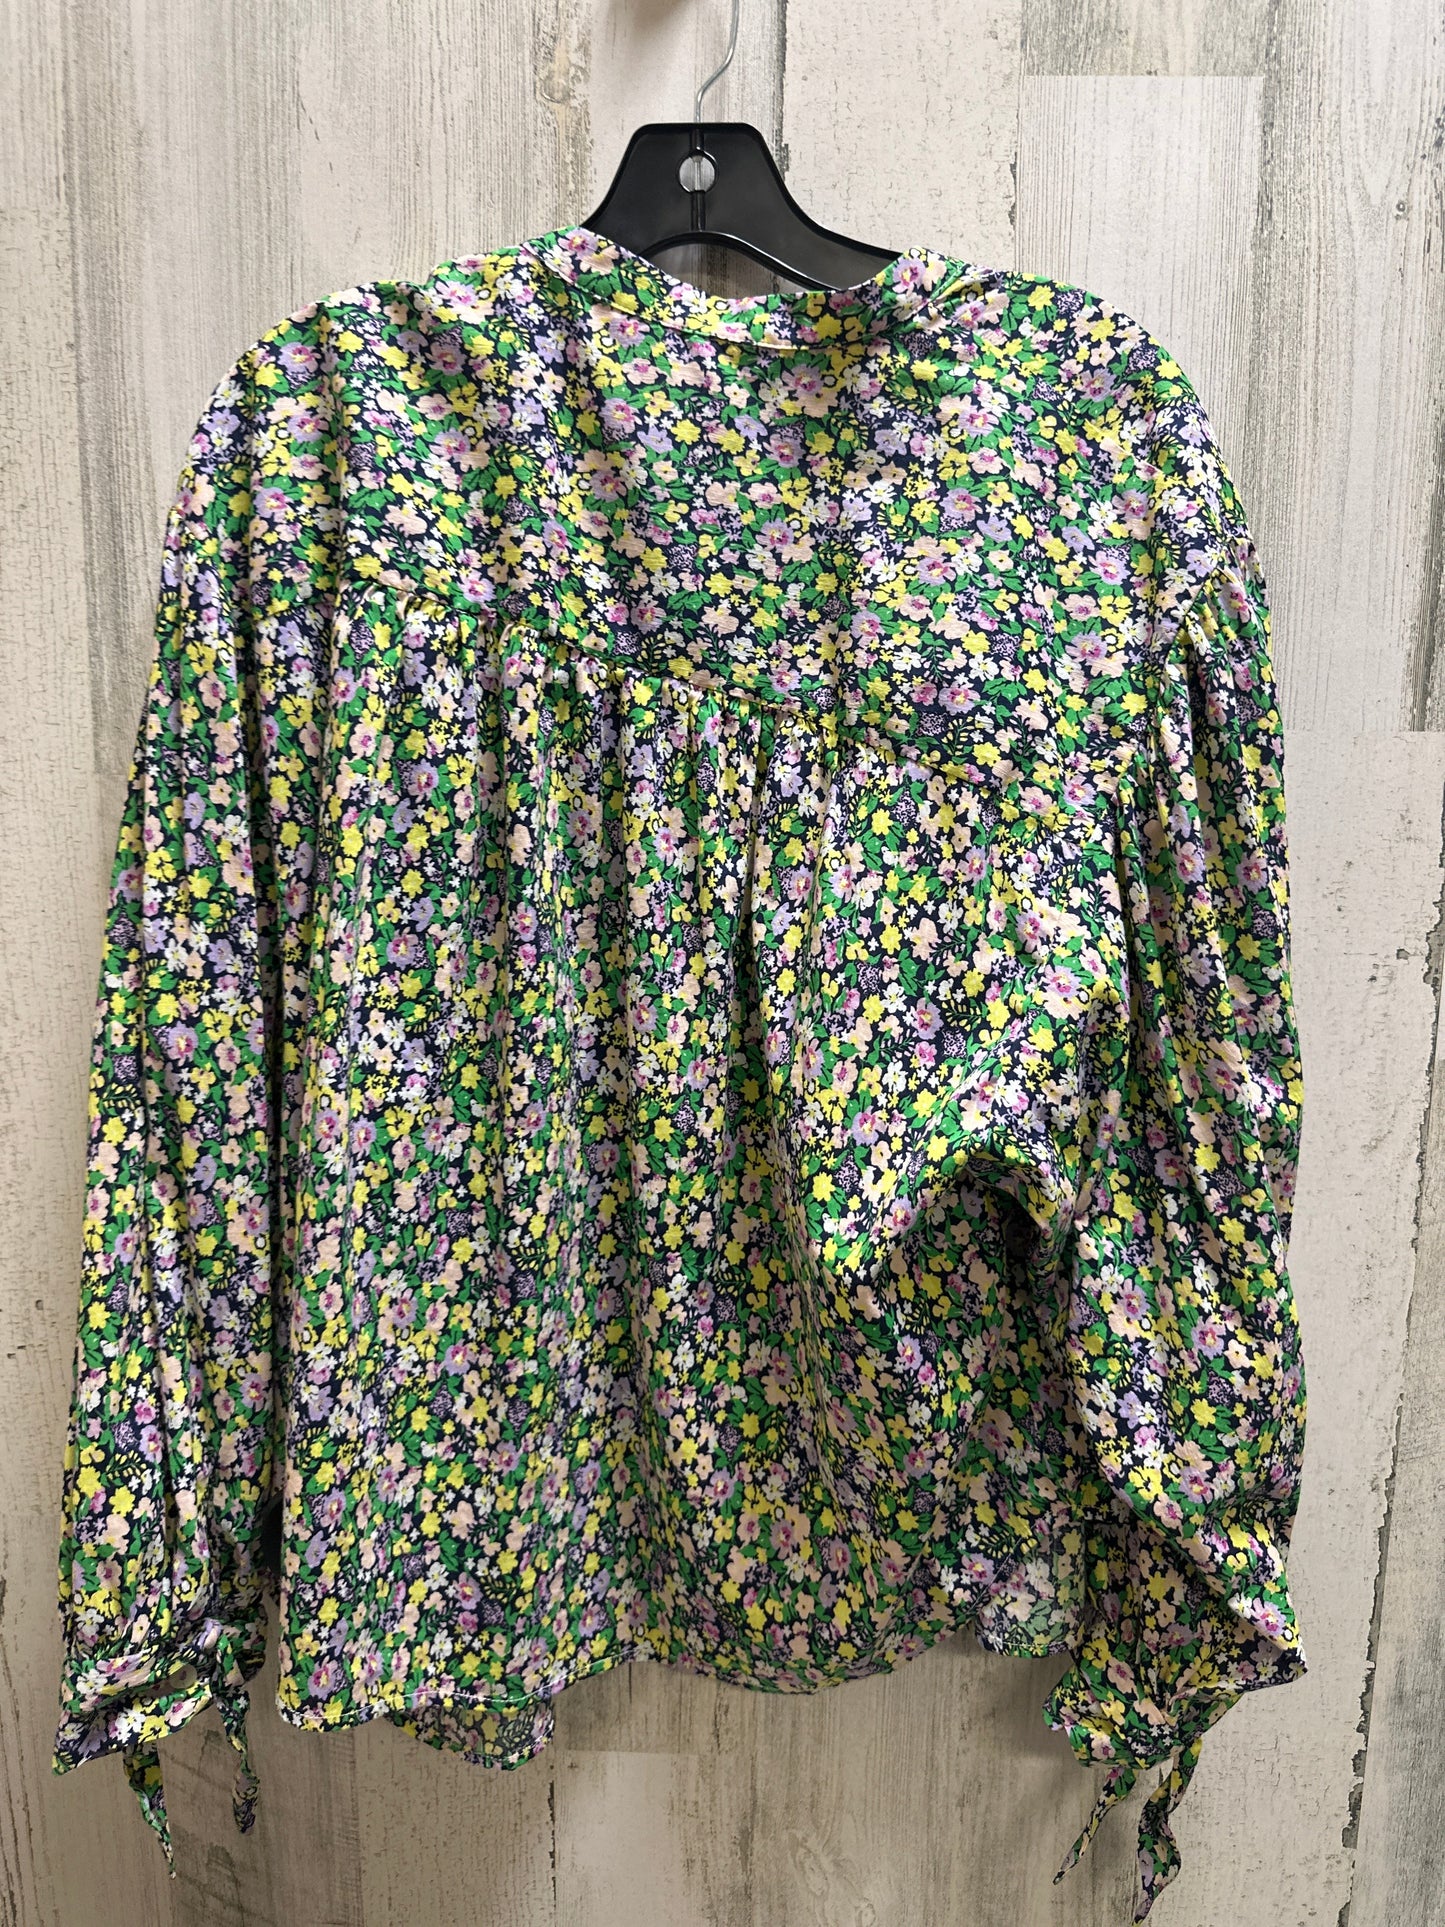 Green Top 3/4 Sleeve Maeve, Size L